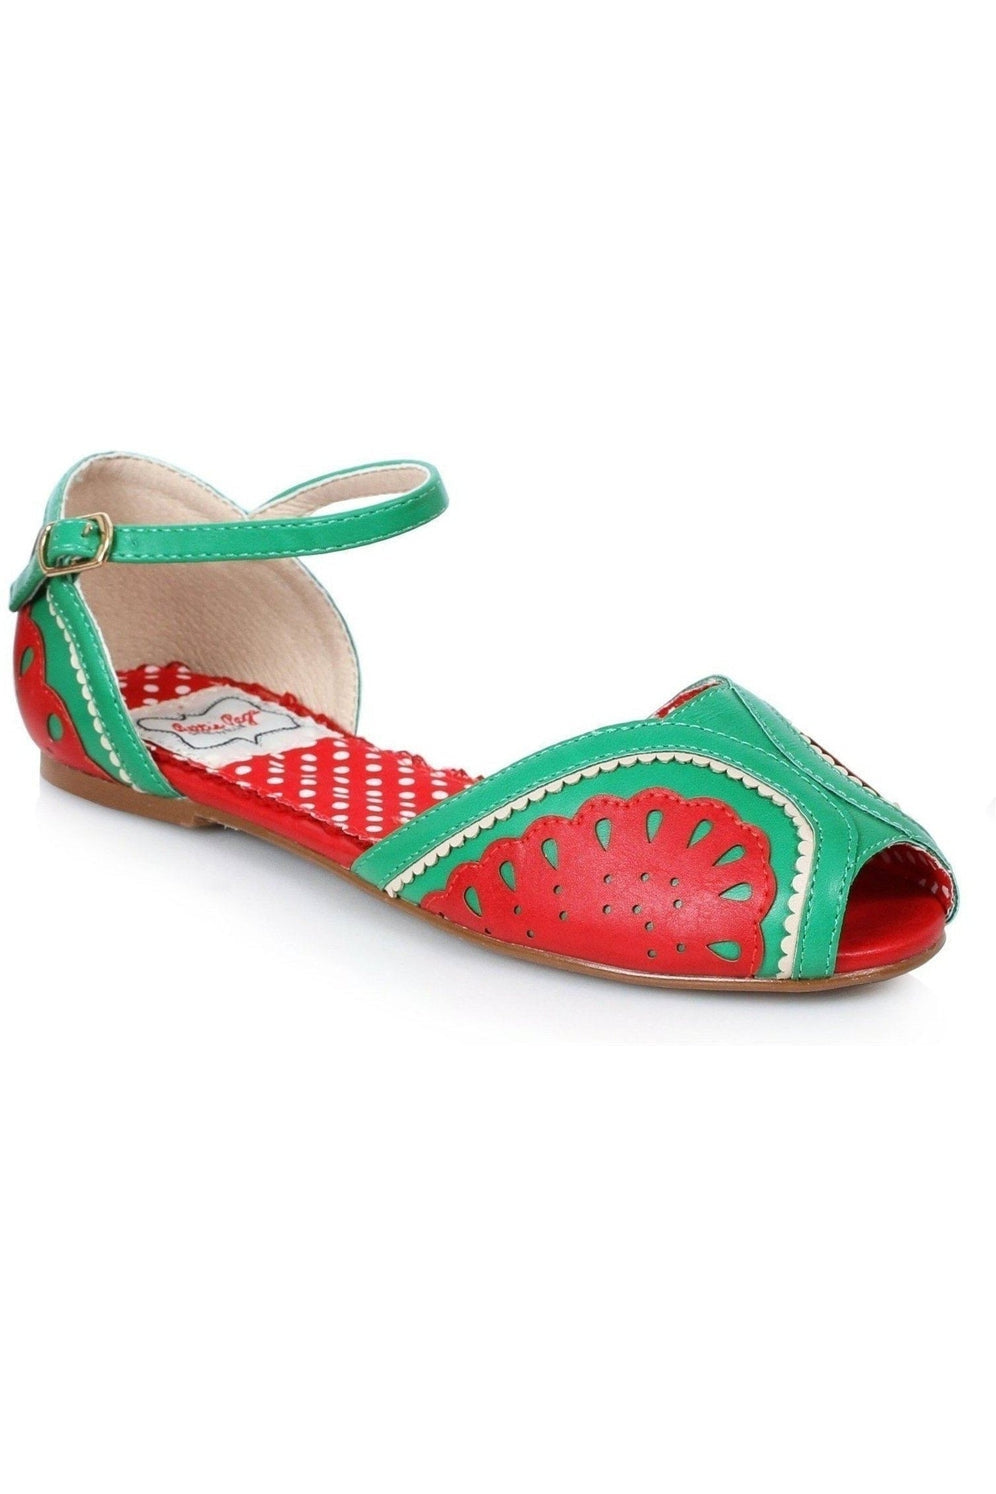 Bettie Paige Fruitie Vintage Sandal | Red Faux Leather-Bettie Page by Ellie-SEXYSHOES.COM